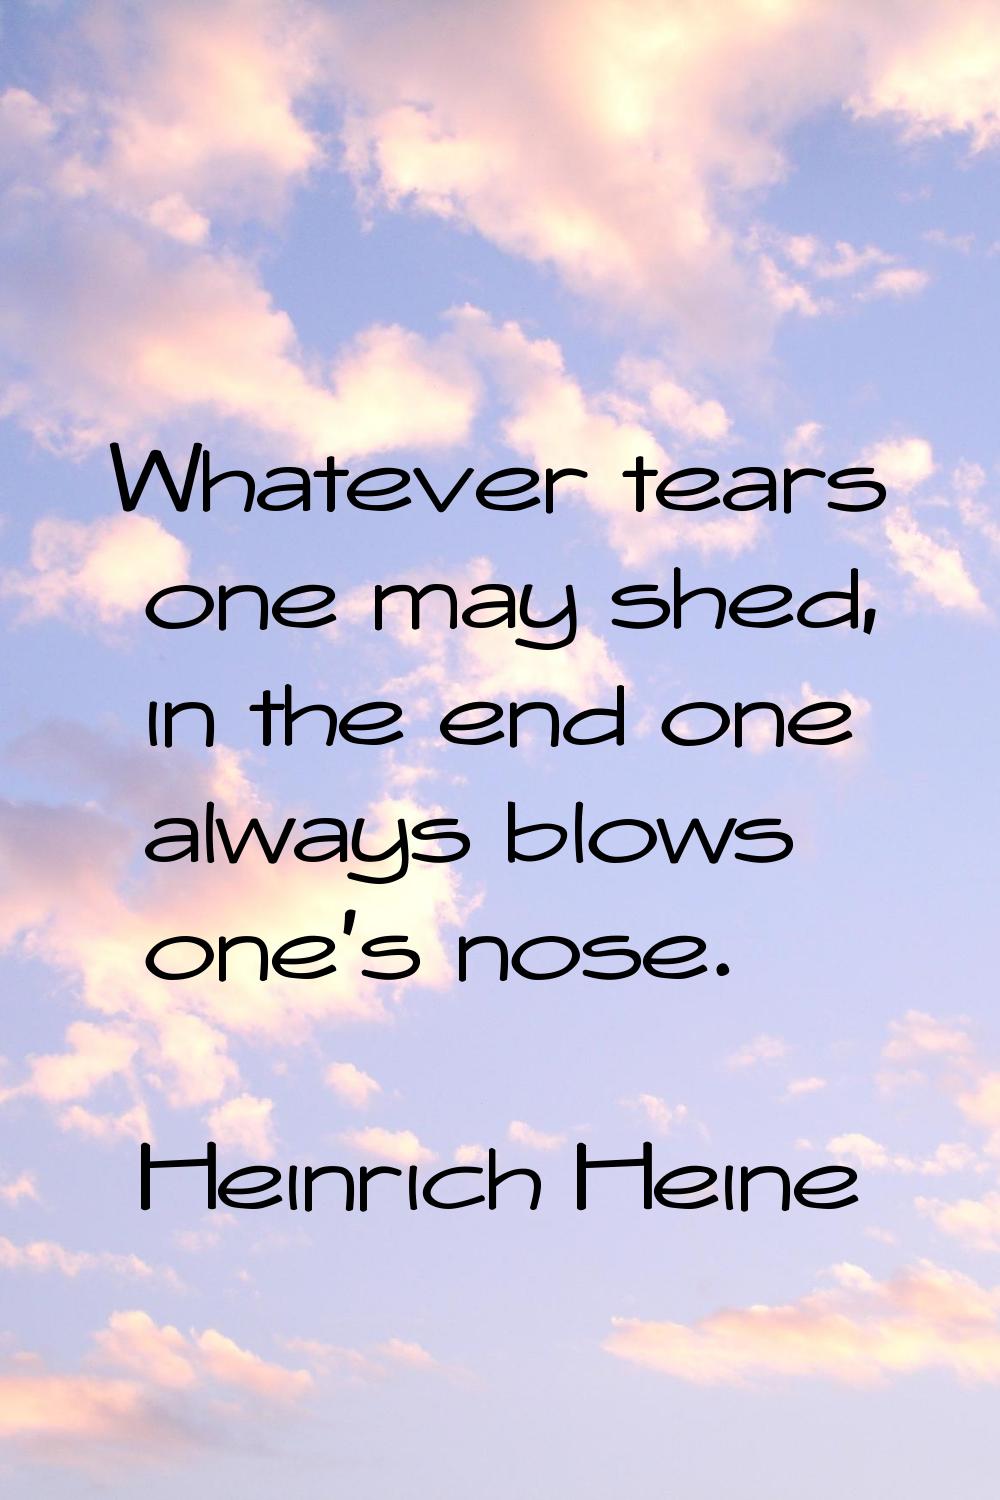 Whatever tears one may shed, in the end one always blows one's nose.